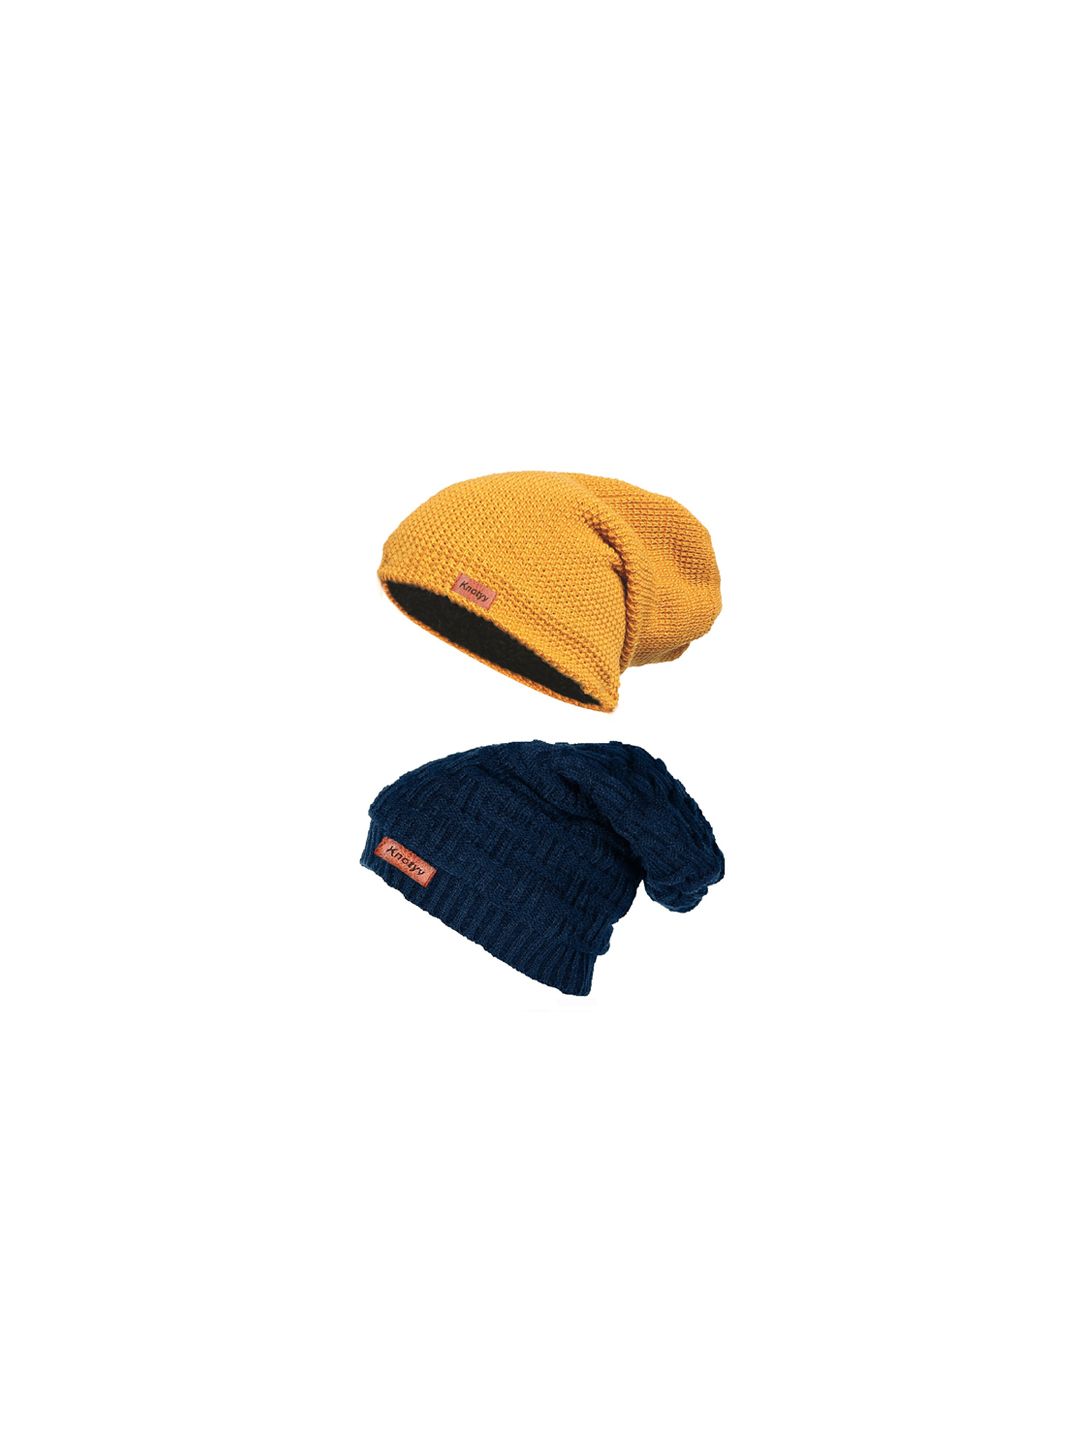 Knotyy Unisex Pack Of 2 Solid Beanies Price in India